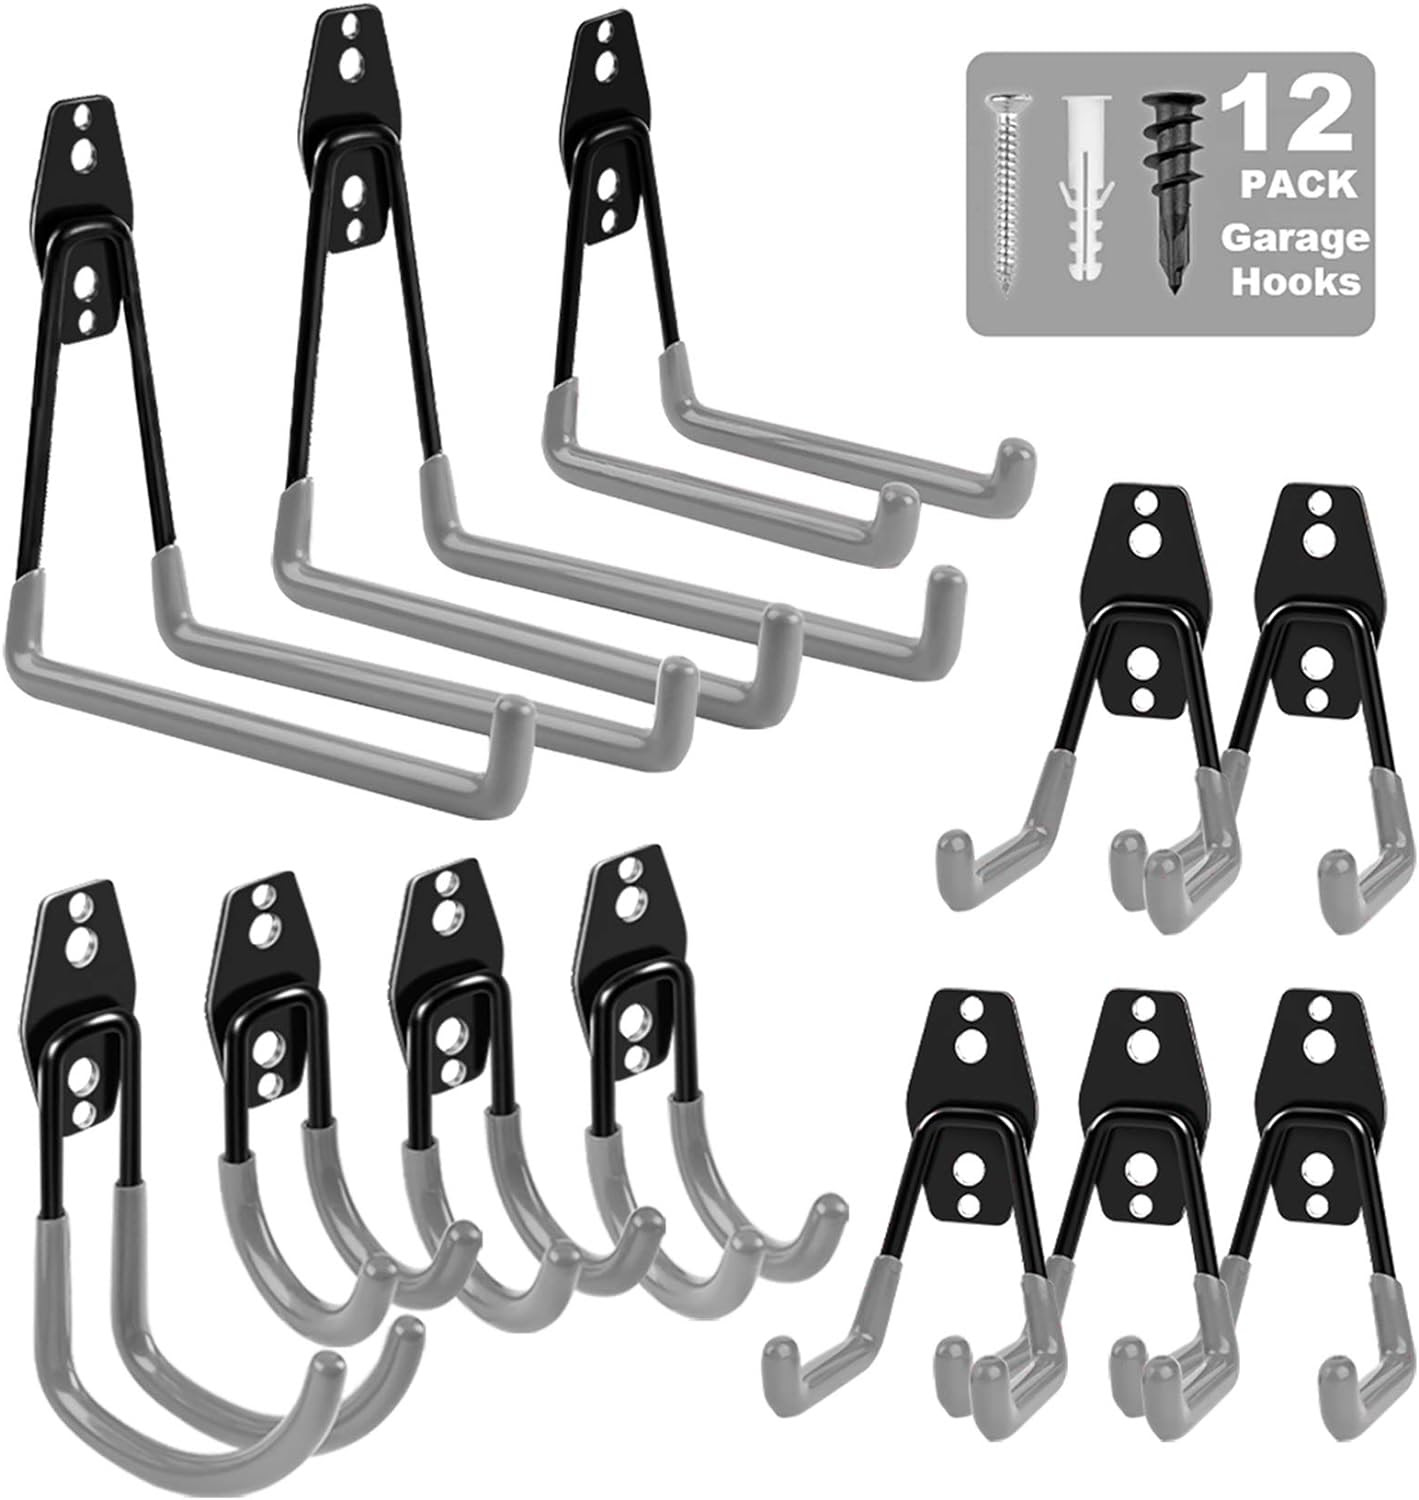 12PK Garage Utility Wall Mount Hooks and Hangers. 1000Packs. EXW Los Angeles $8.95/pack.